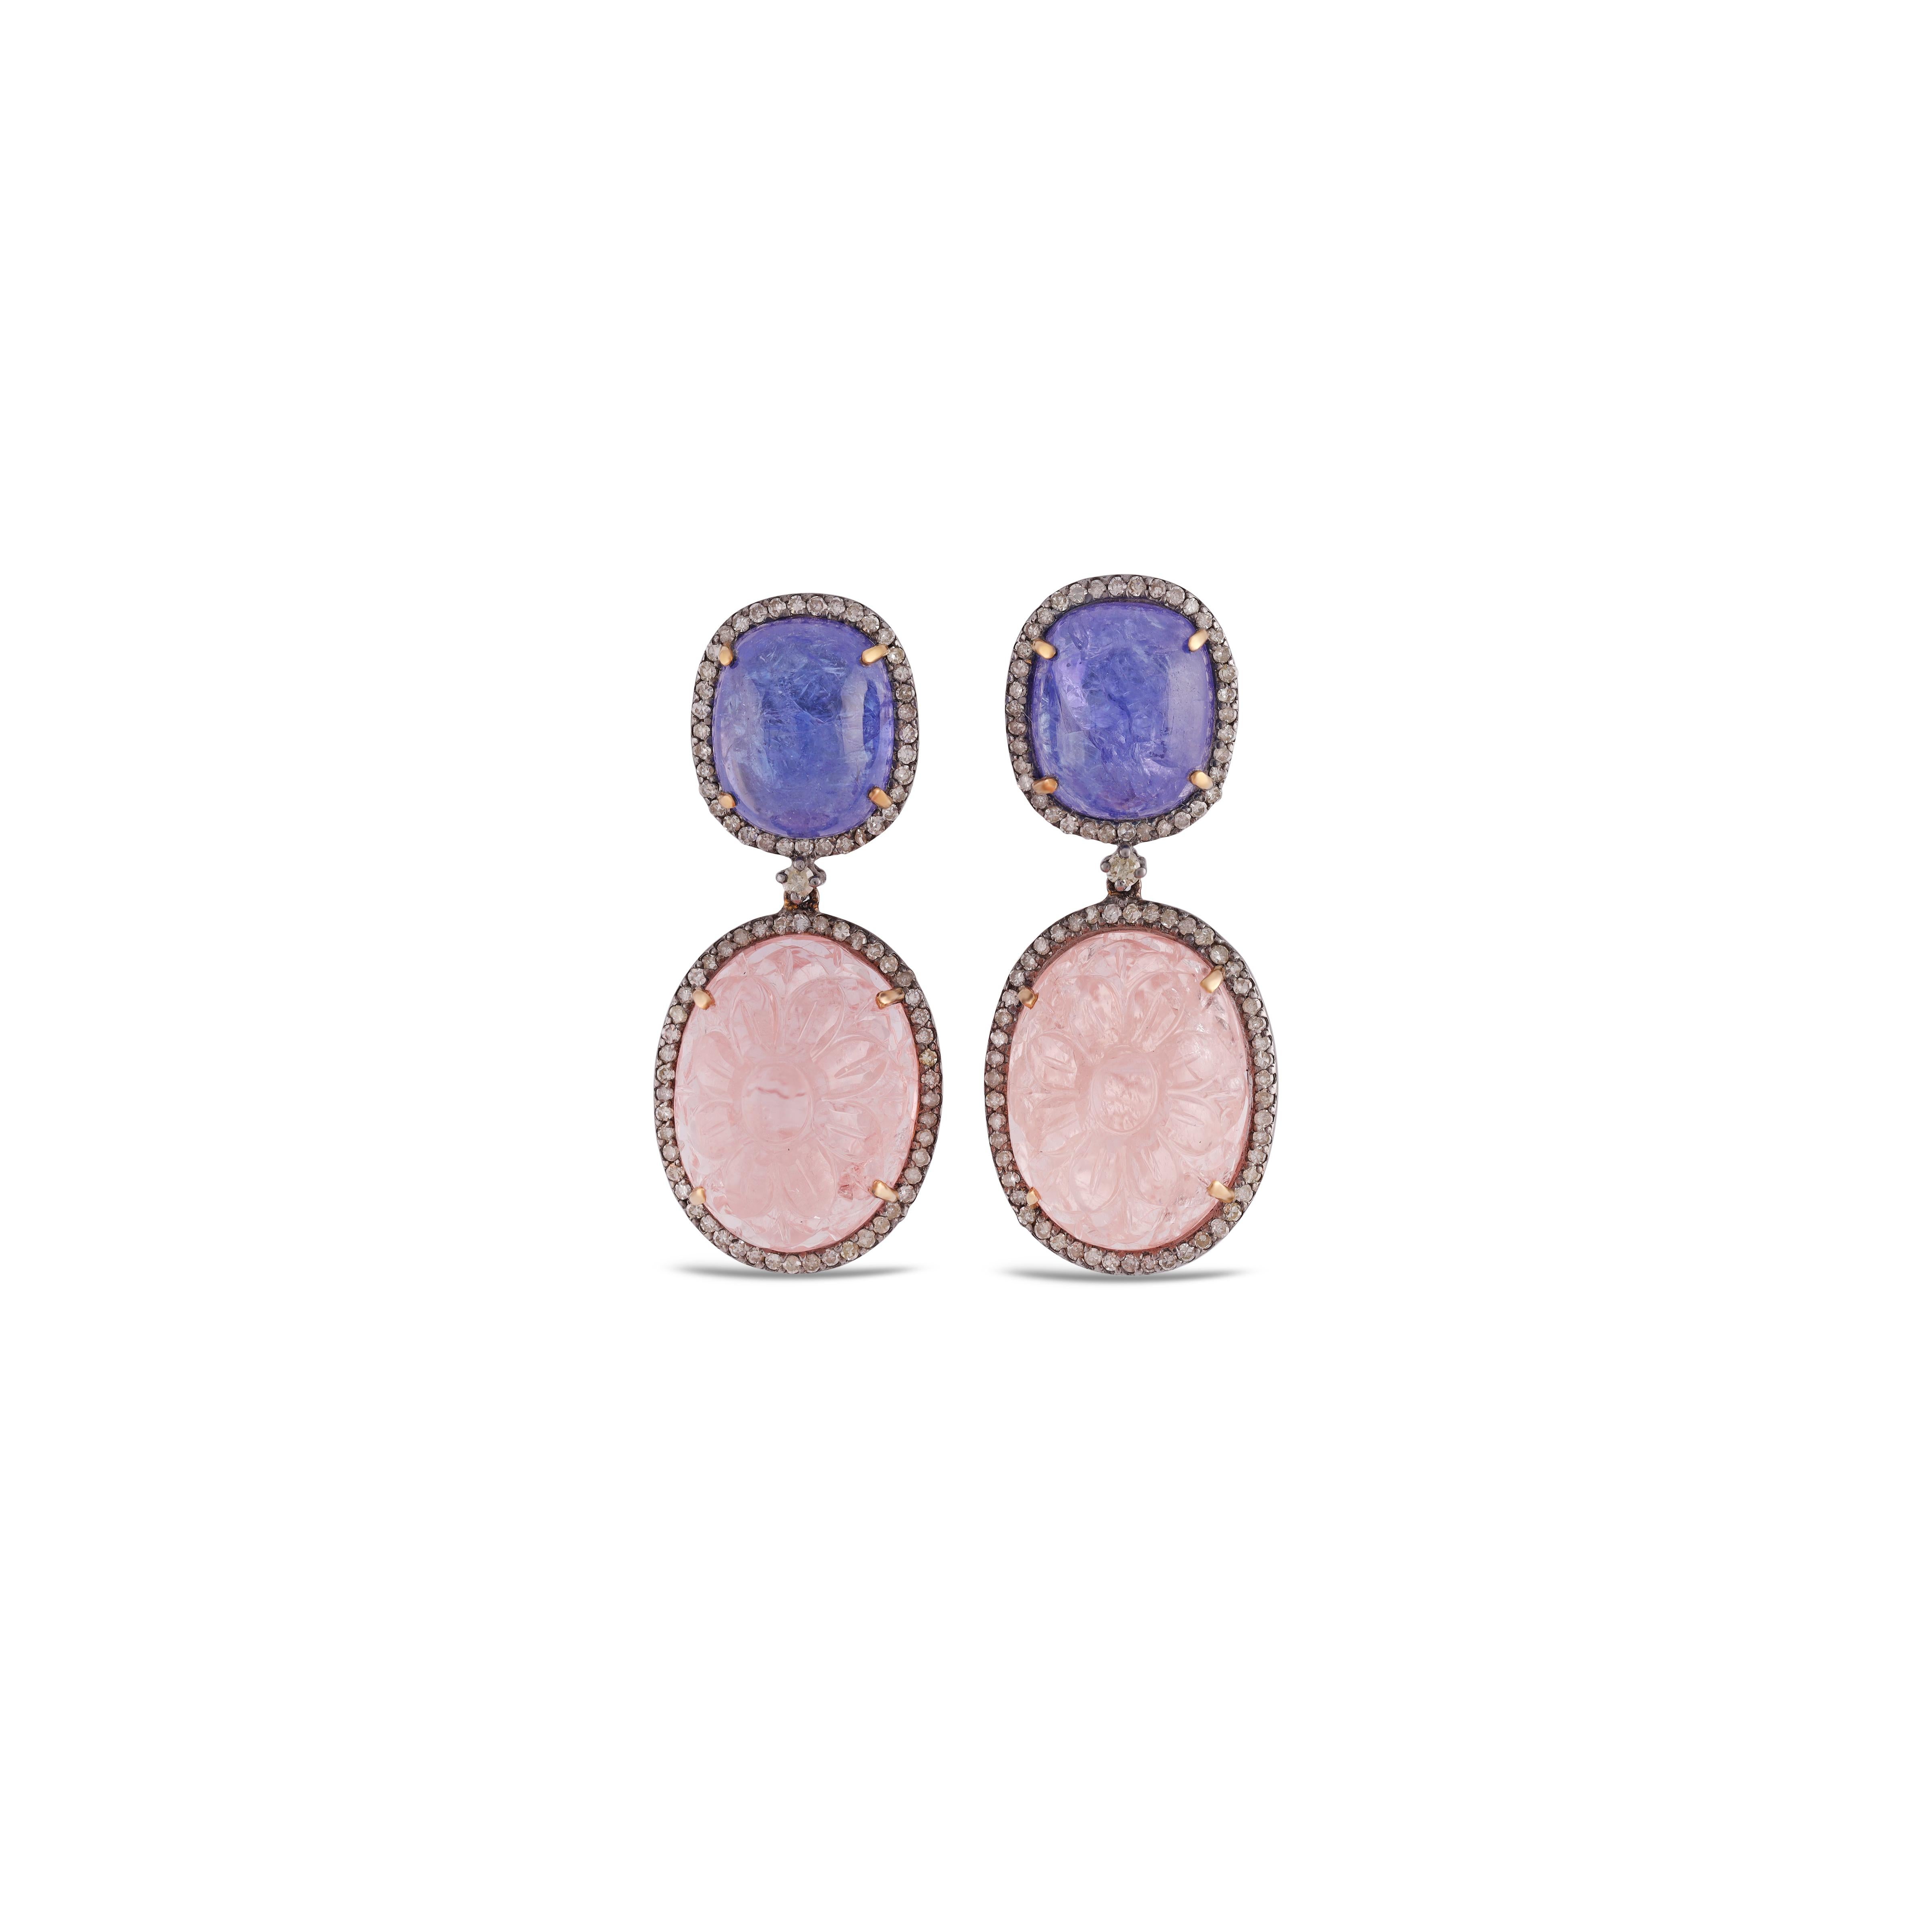 A stunning, Victorian  and impressive pair of  16.13 carat blue tanzanite, Morganite 30.68 Carat & 0.99 Carat  Diamond with Solid 14k Gold & Silver 

Studs create a subtle beauty while showcasing the colors of the natural precious gemstones and